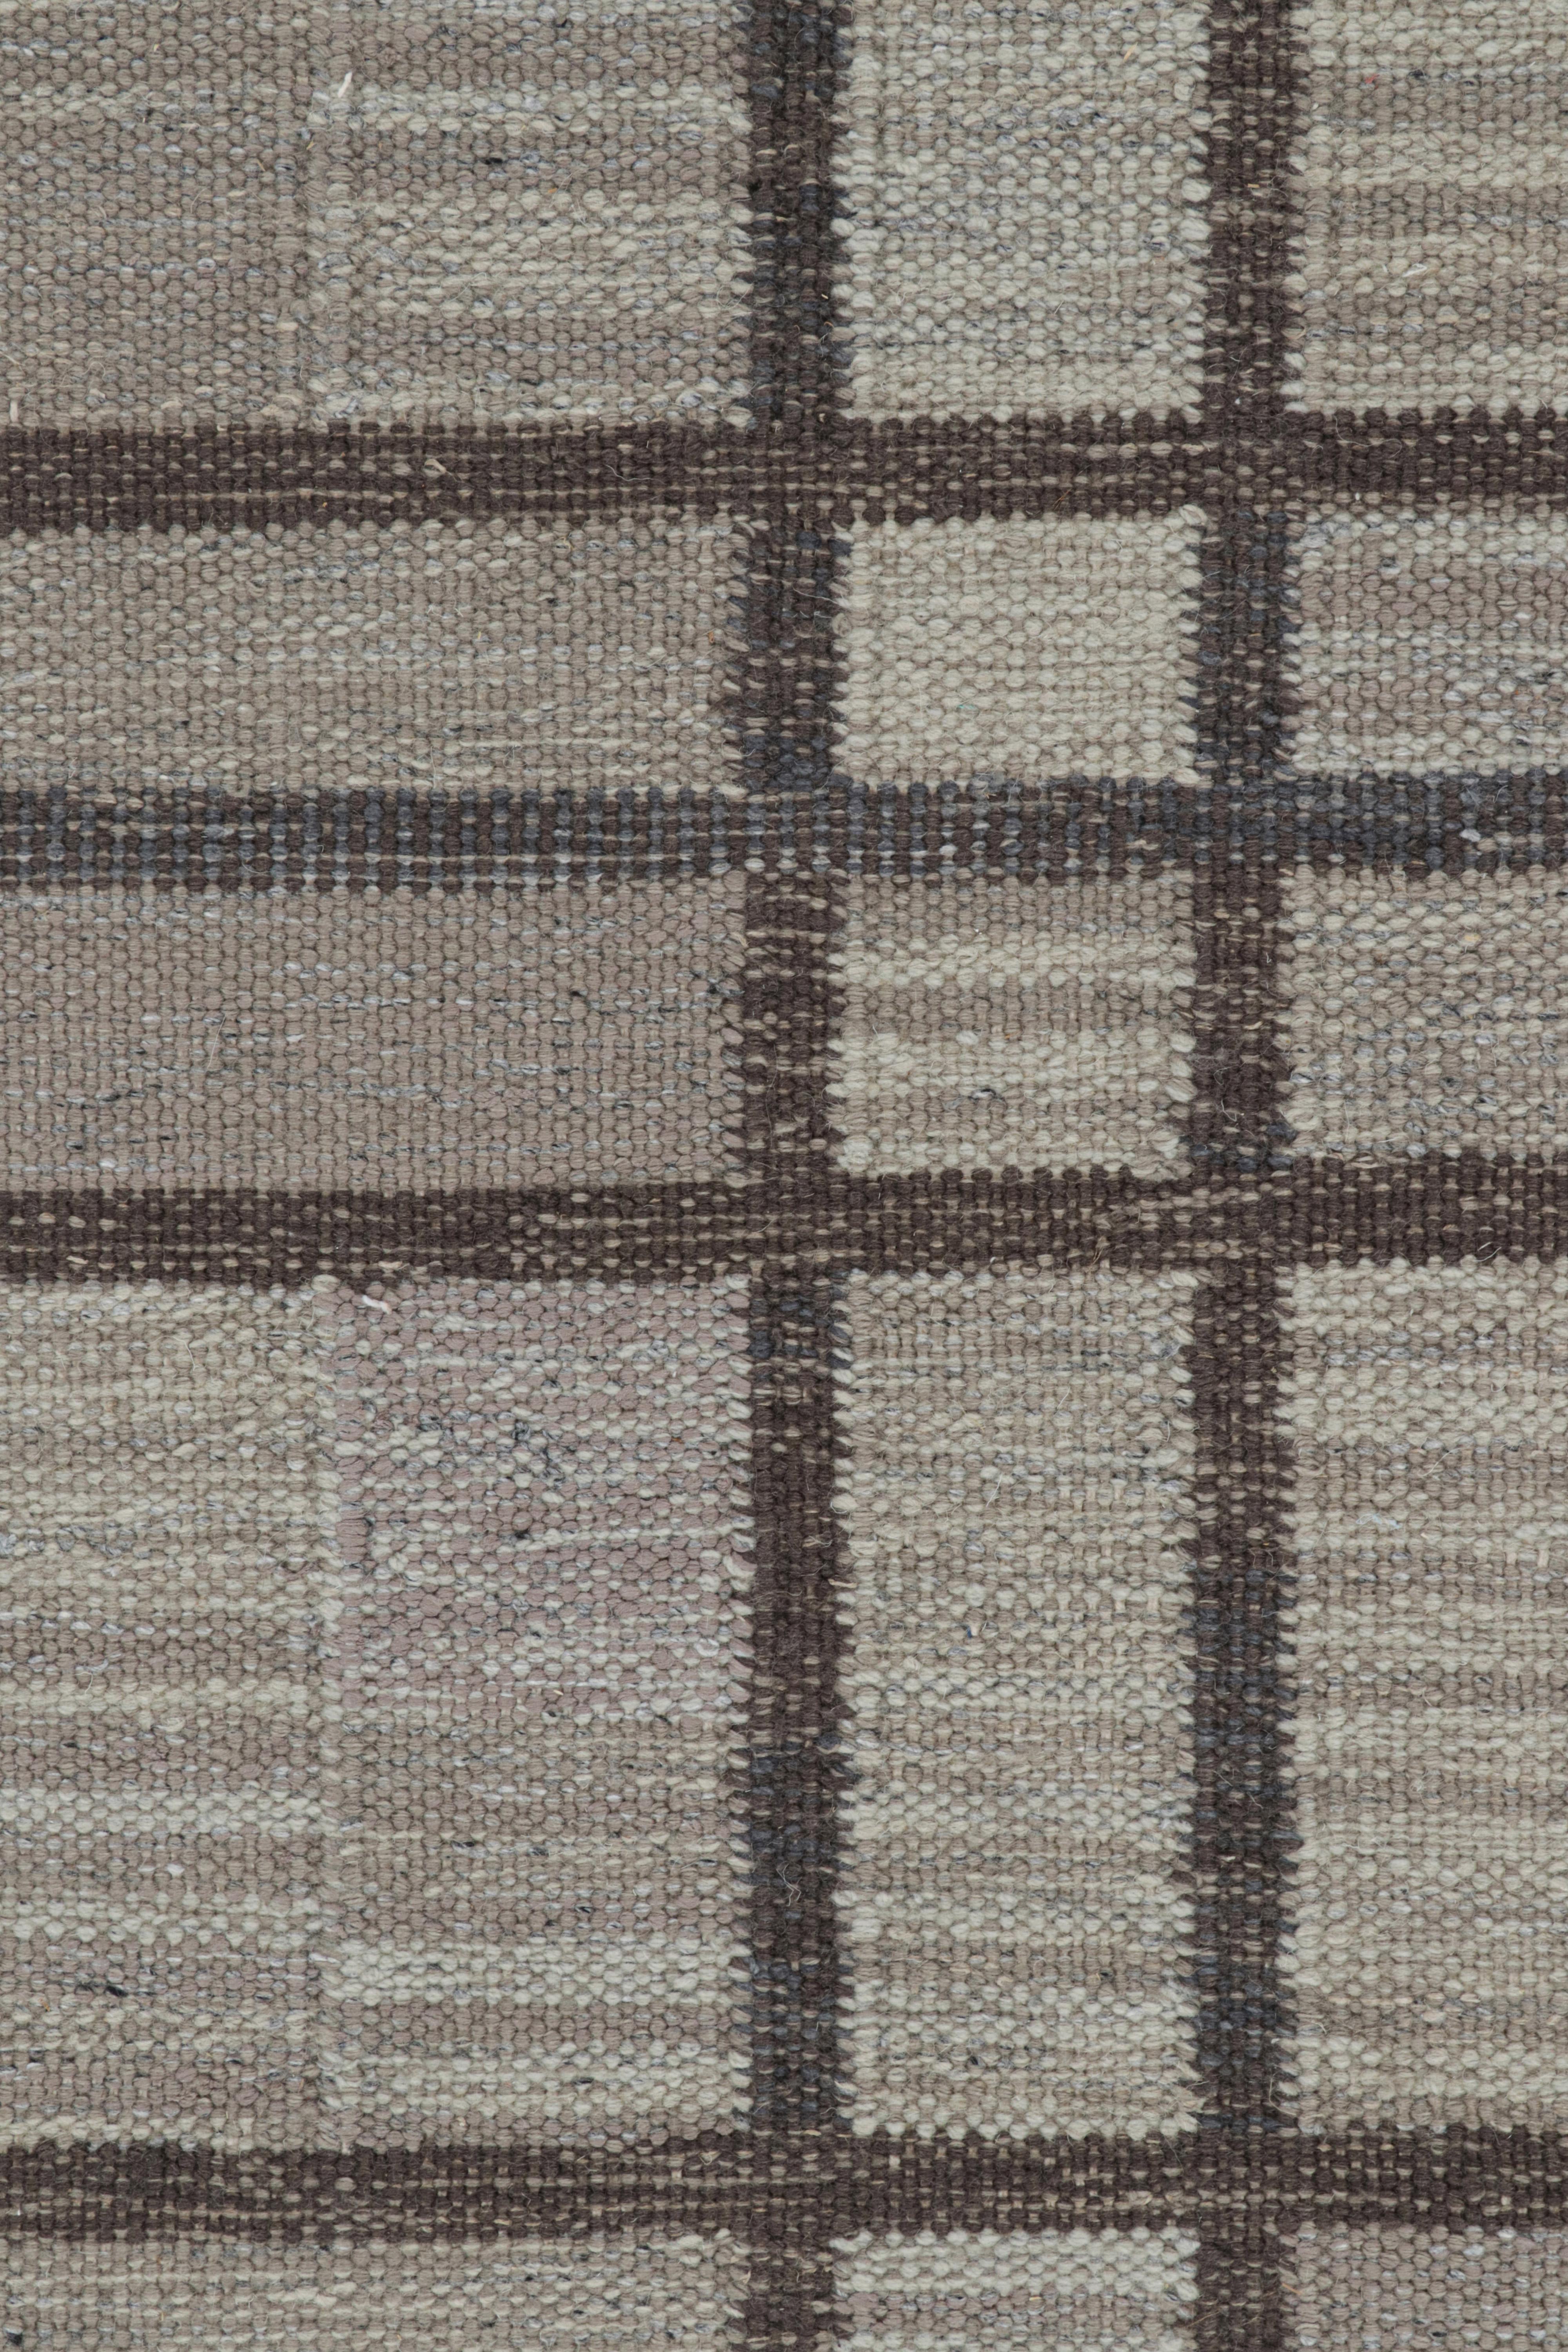 Modern Rug & Kilim’s Scandinavian Style Rug with Geometric Patterns in Tones of Brown For Sale